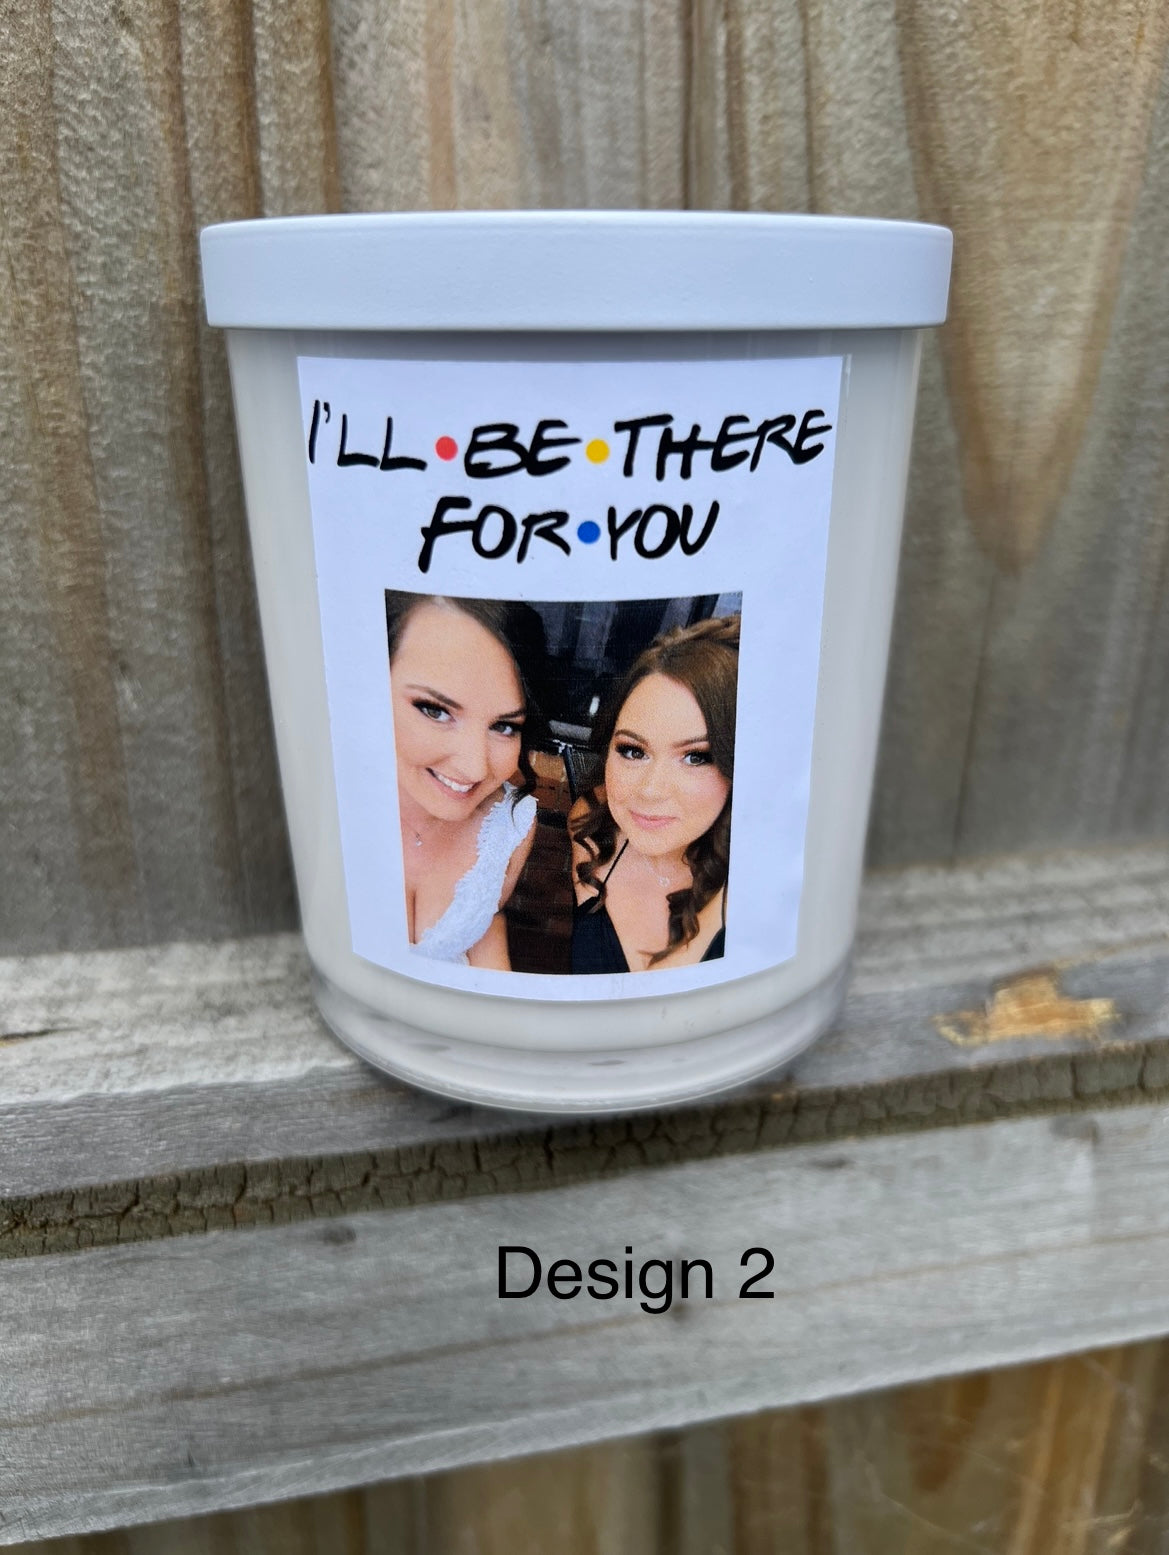 Friendship candles